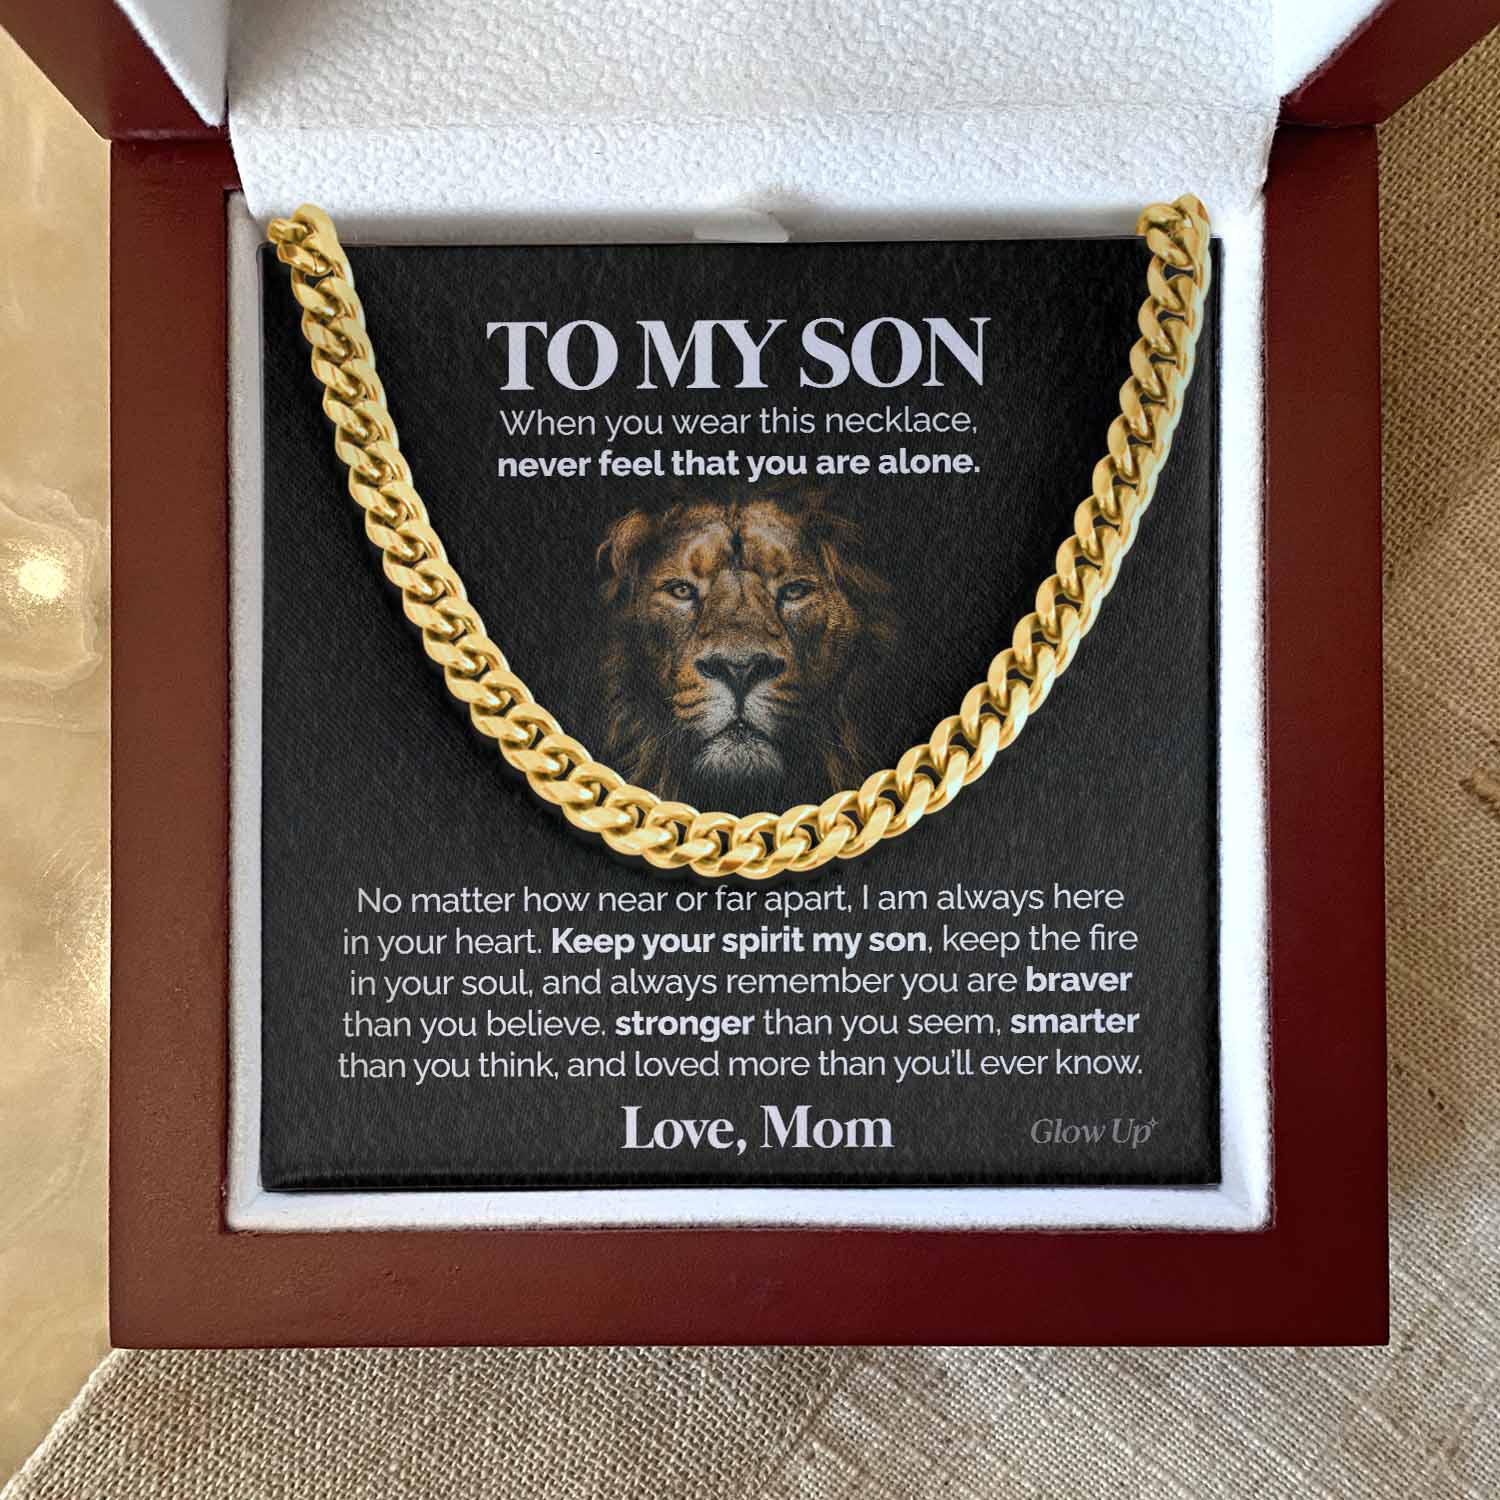 ShineOn Fulfillment Jewelry 14K Yellow Gold Finish / Luxury Box To my Son - Keep your spirit my son - Cuban Link Chain